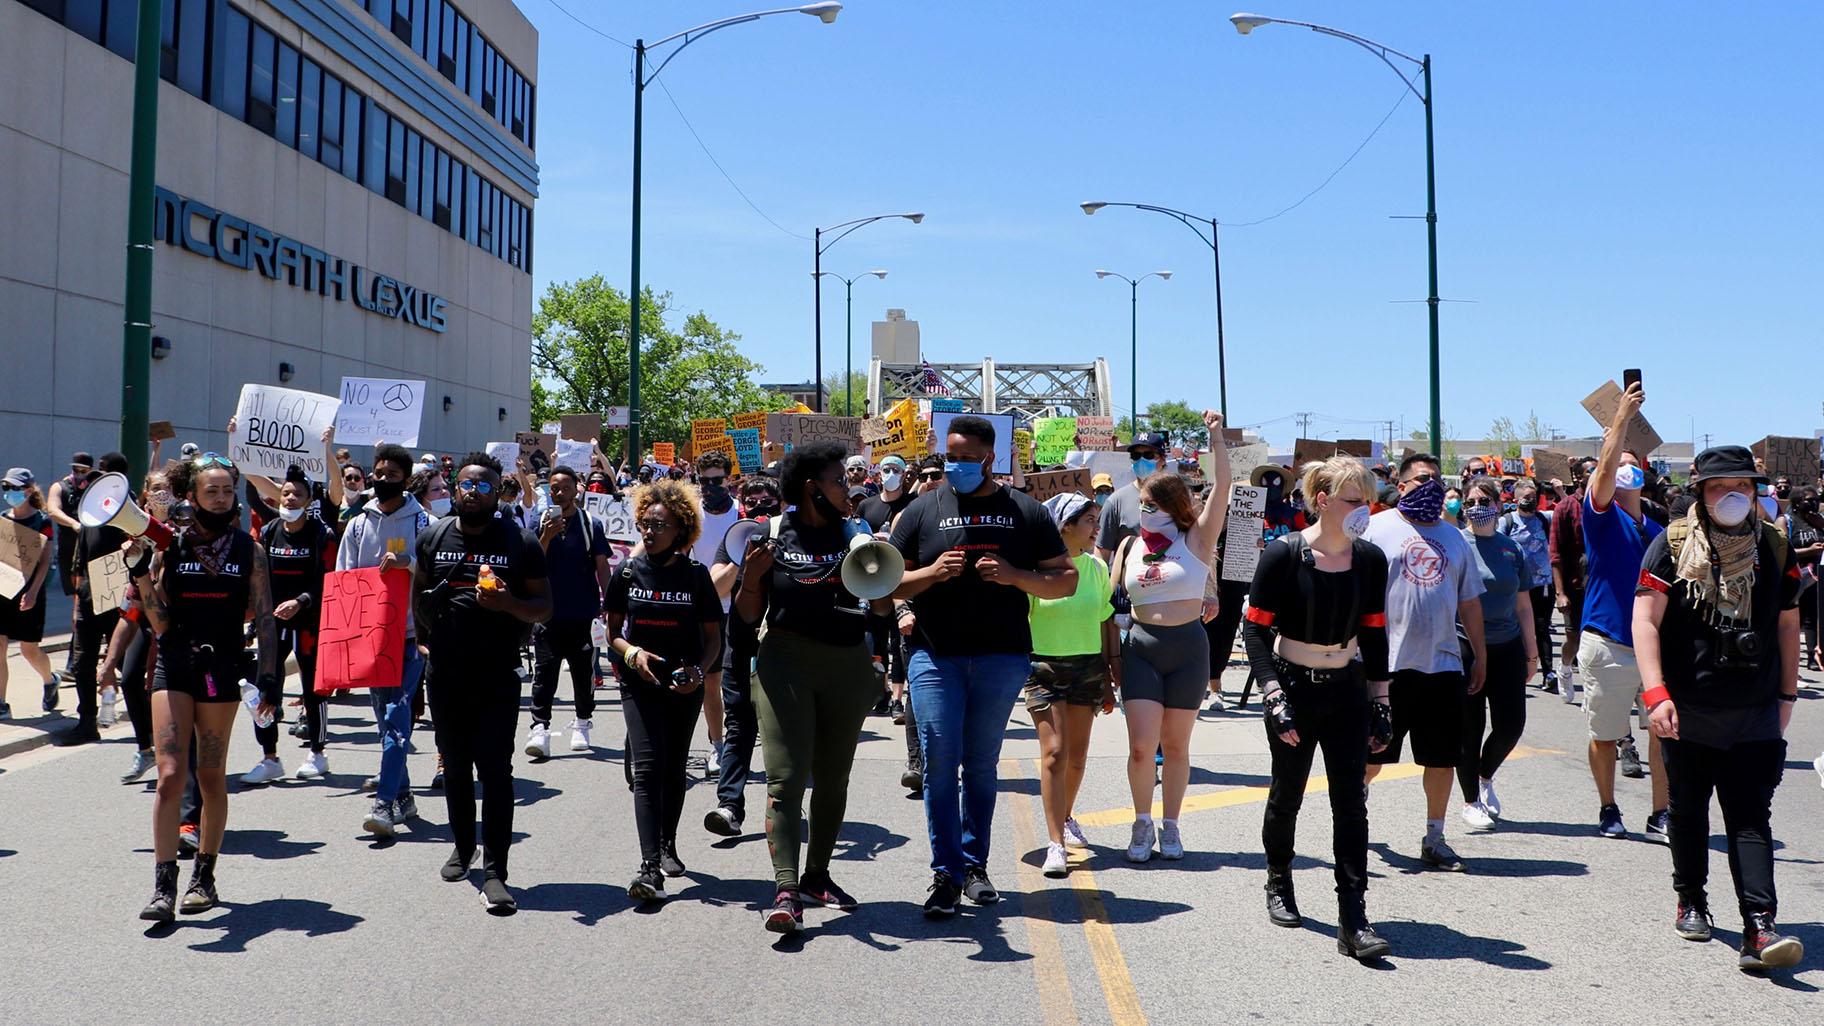 Thousands gathered Saturday, June 6, 2020 in Chicago’s Union Park and marched to Seward Park to peacefully protest police brutality and call for justice. (Evan Garcia / WTTW News)